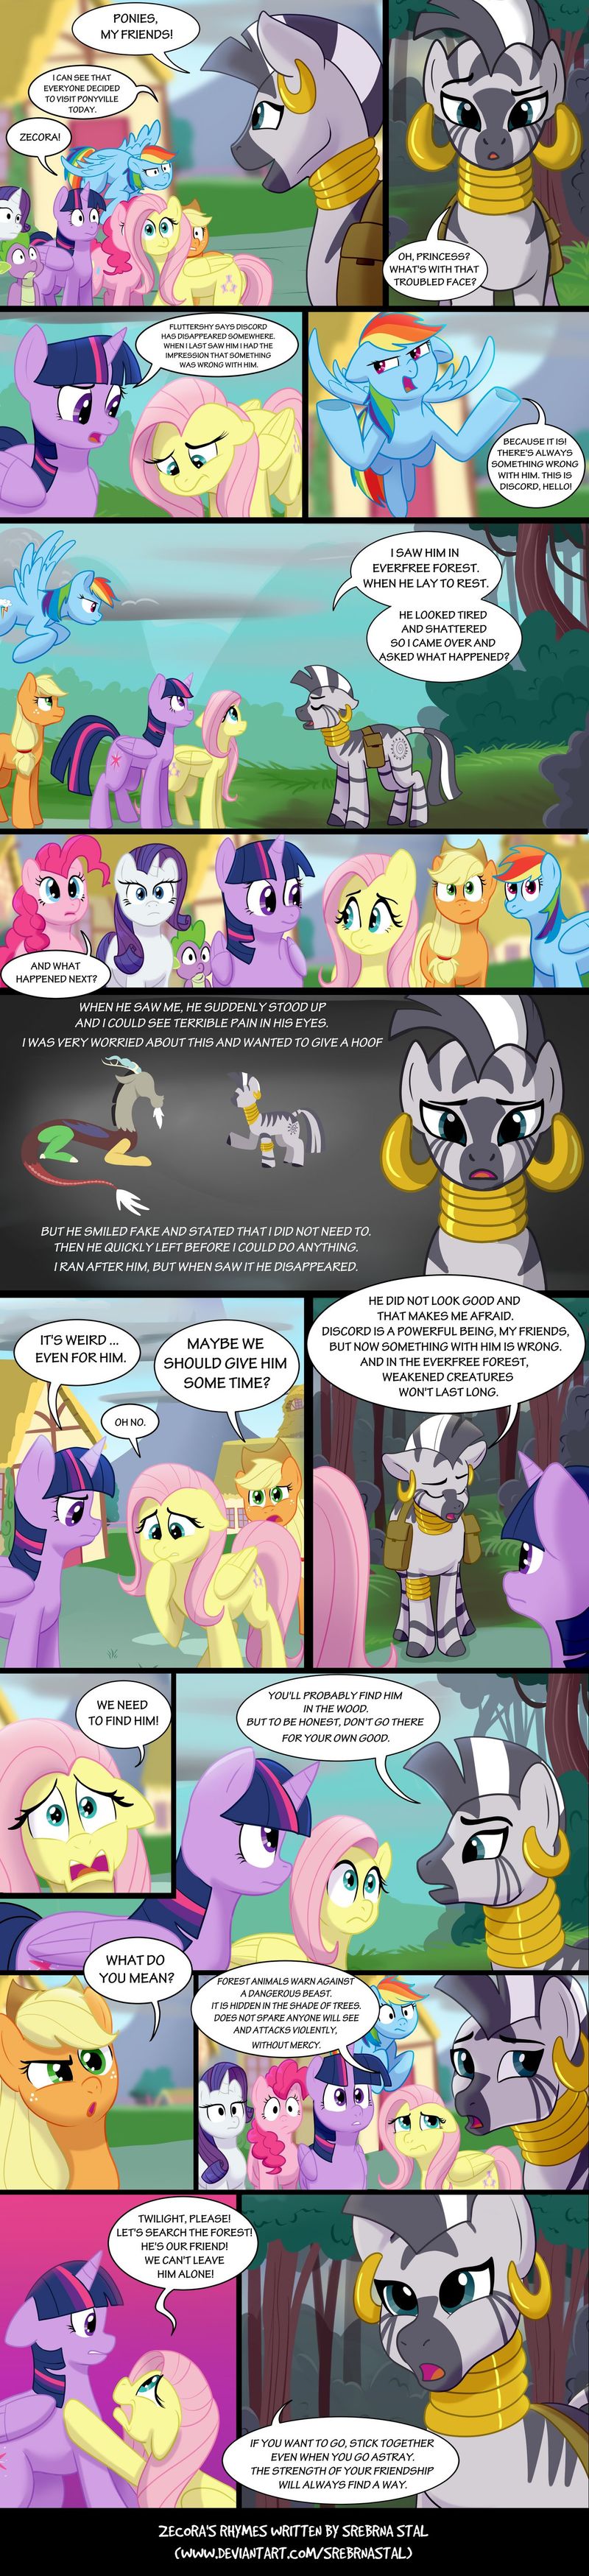 Page 55-57: Zecora